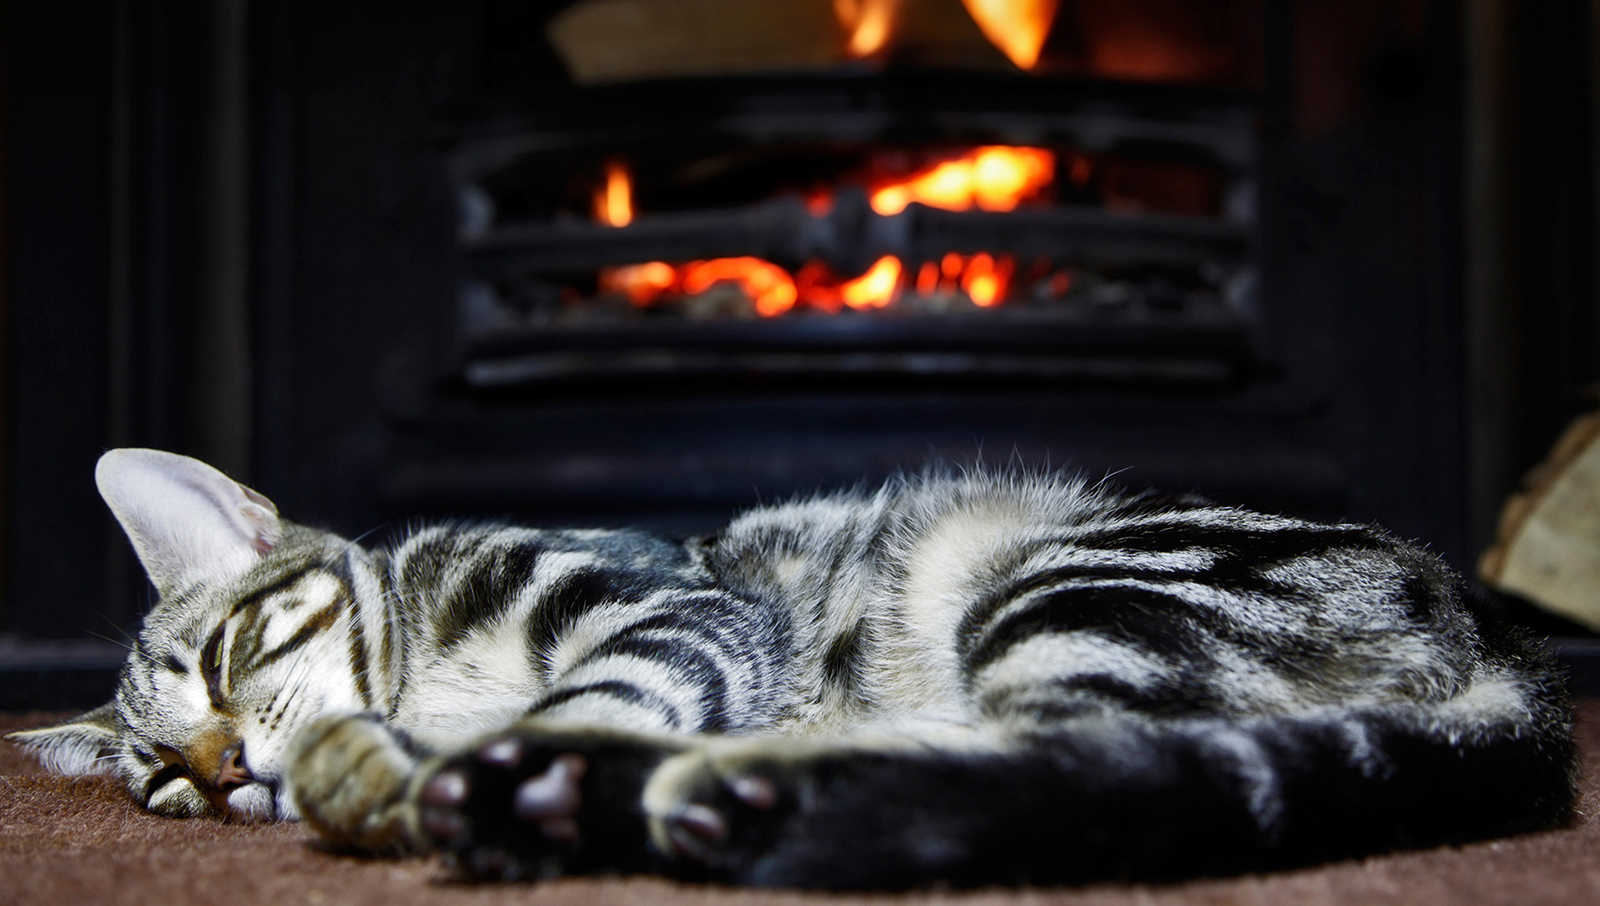 Cat by Fireplace